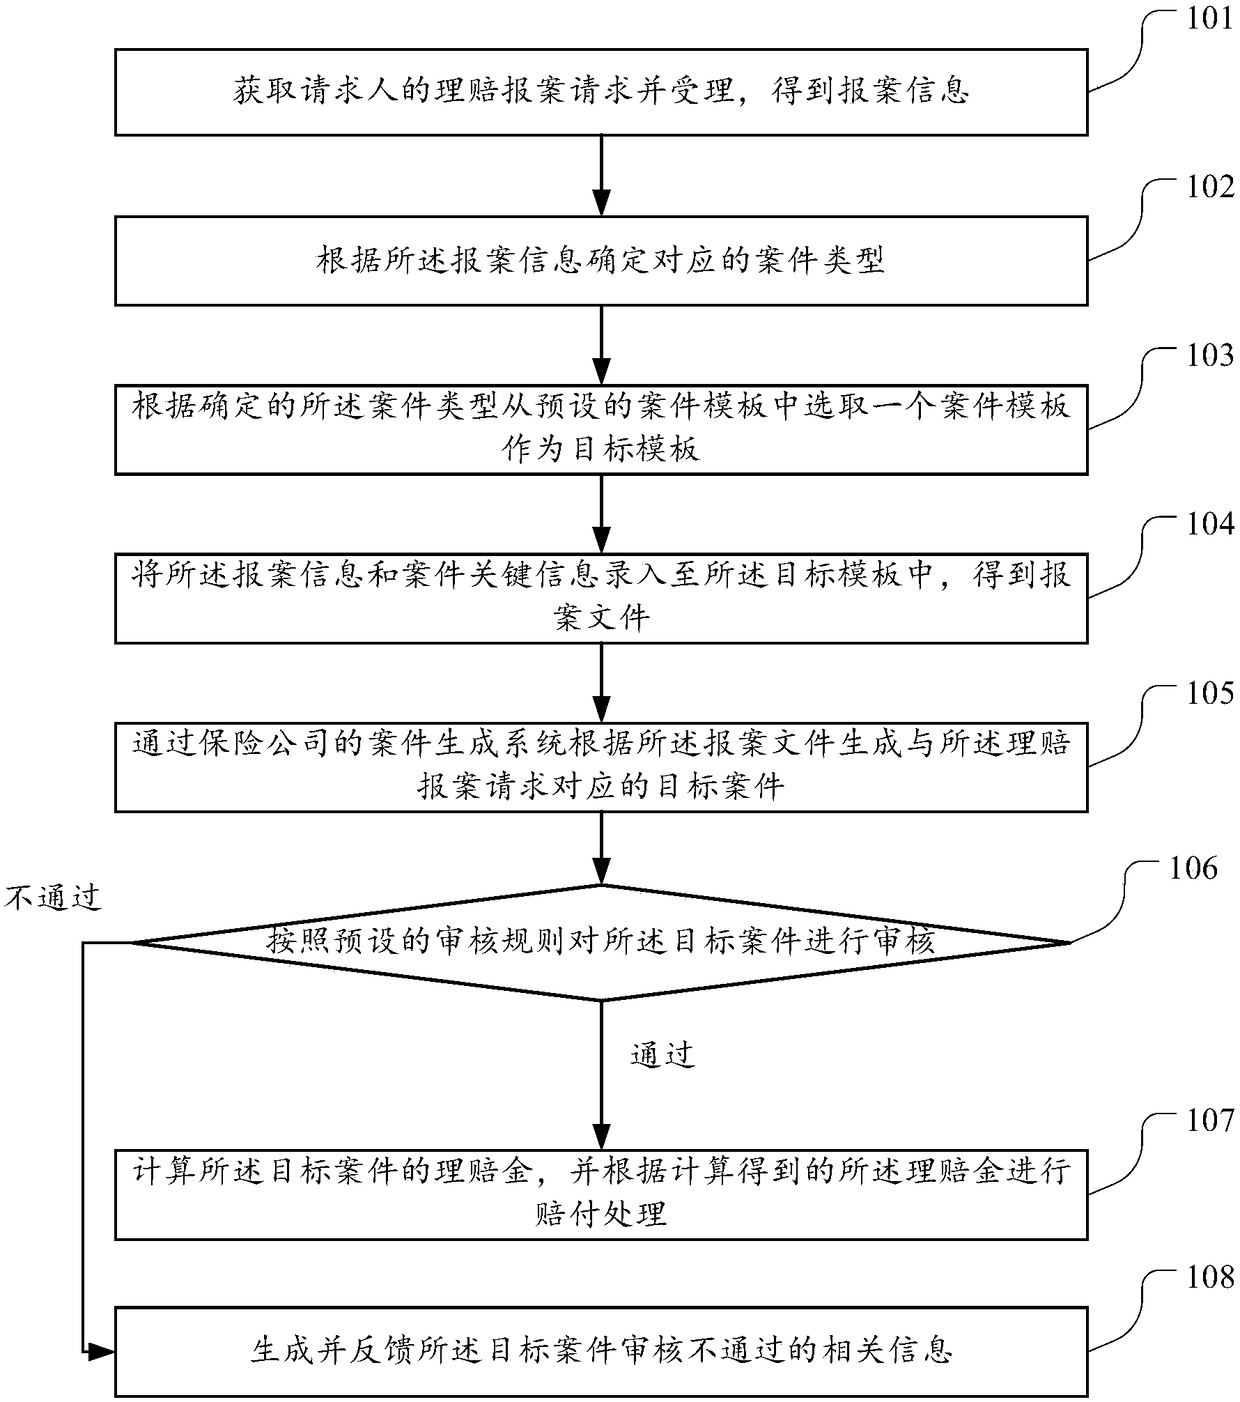 Claim case processing method and device